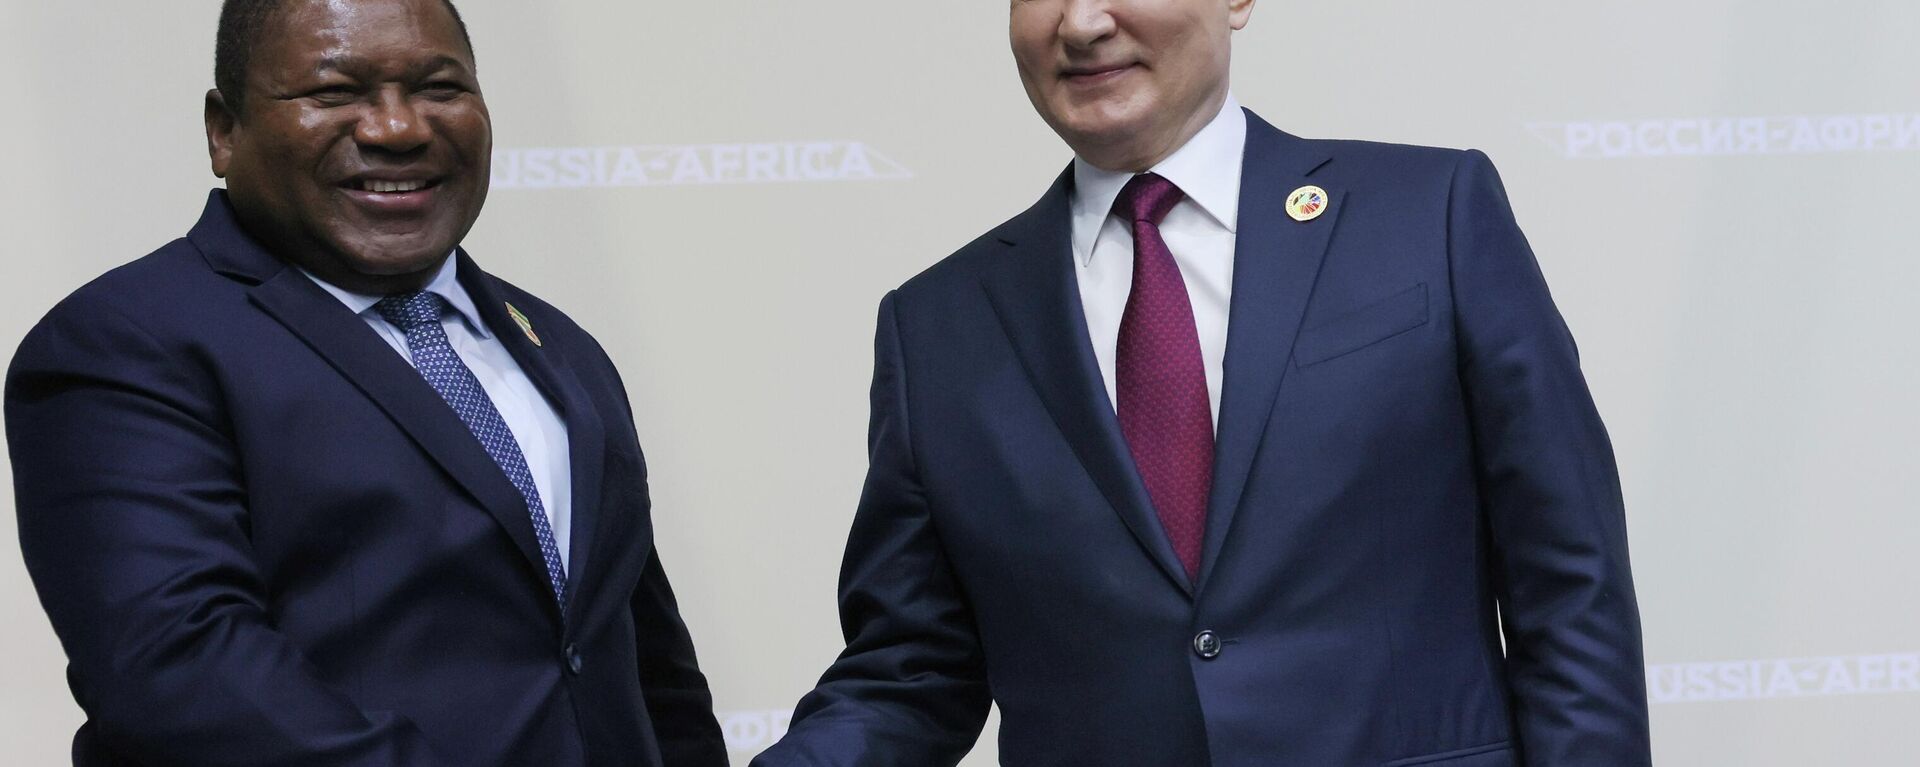 Russian President Vladimir Putin and Mozambique President Filipe Nyusi before the start of the plenary session of the Second Russia-Africa Summit and Forum at the Expoforum Convention and Exhibition Center, July 27, 2023 - Sputnik Africa, 1920, 27.07.2023